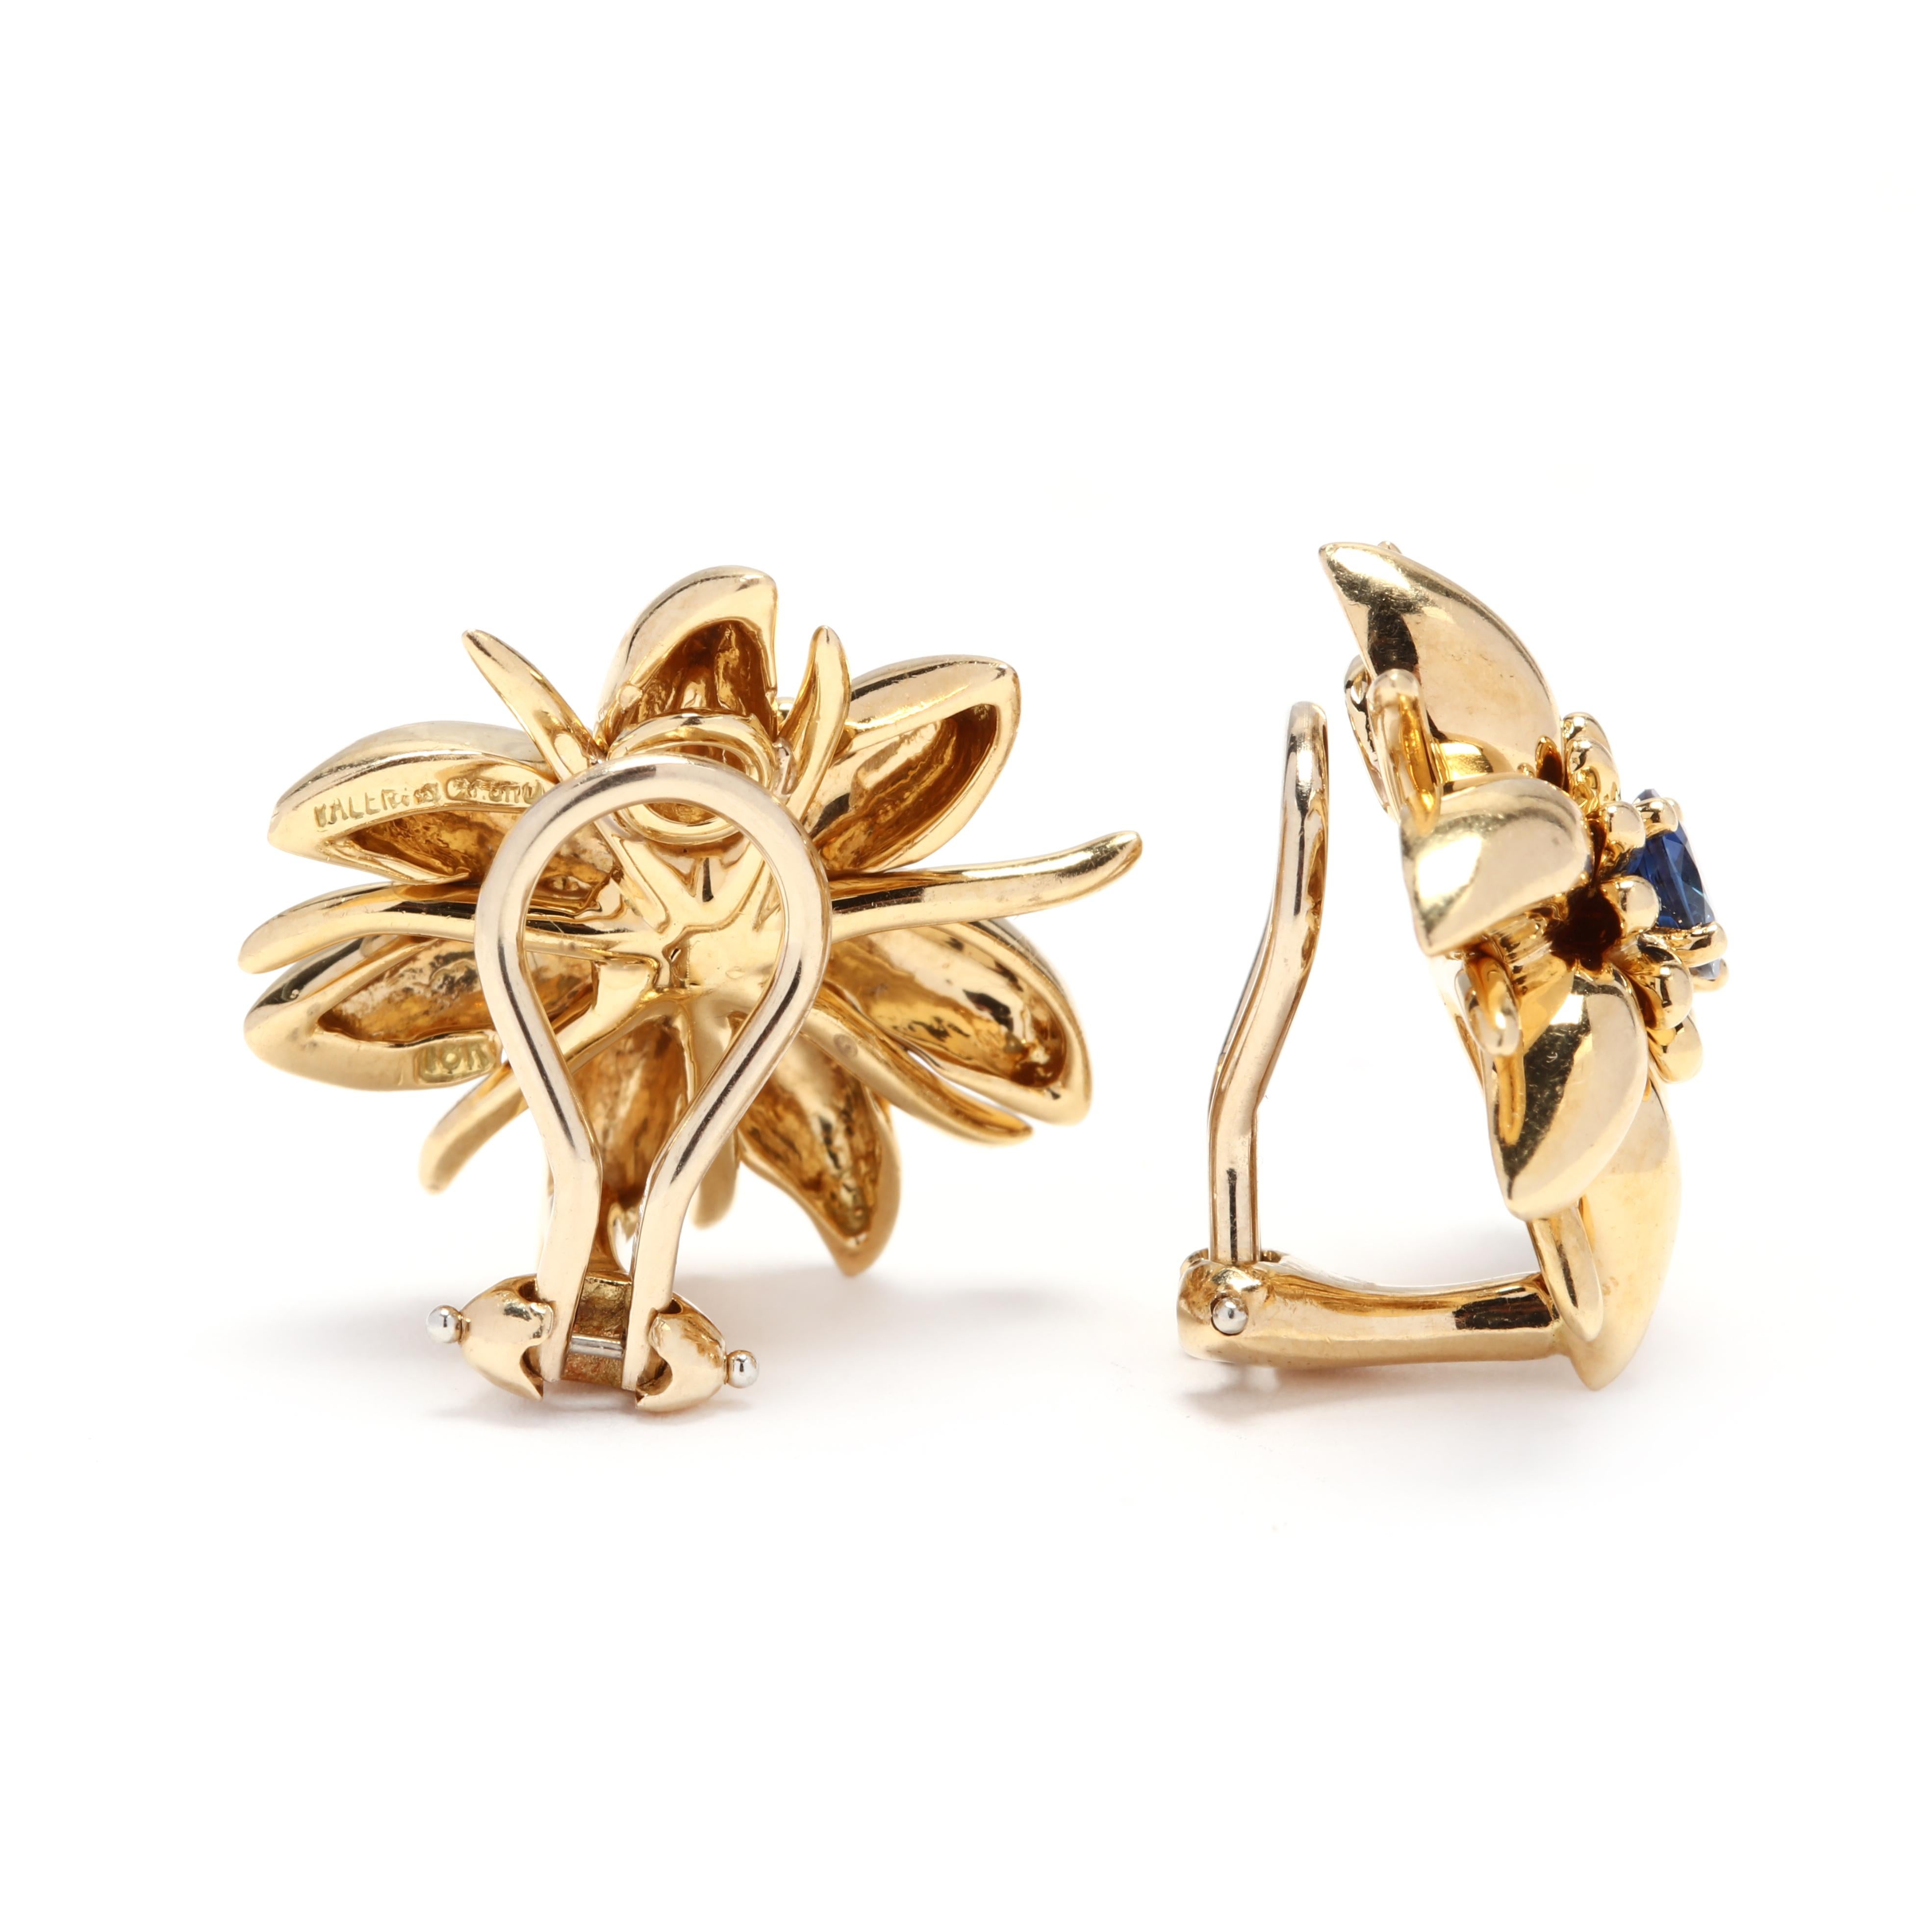 A pair of 18 karat yellow gold and sapphire flower earrings. These earrings feature a floral motif set with round cut sapphires and with omega backs.

Stones:
- sapphires, 2 stones
- round cut
- 5 mm
- approximately 1.40 total carat

Length: 7/8 in.